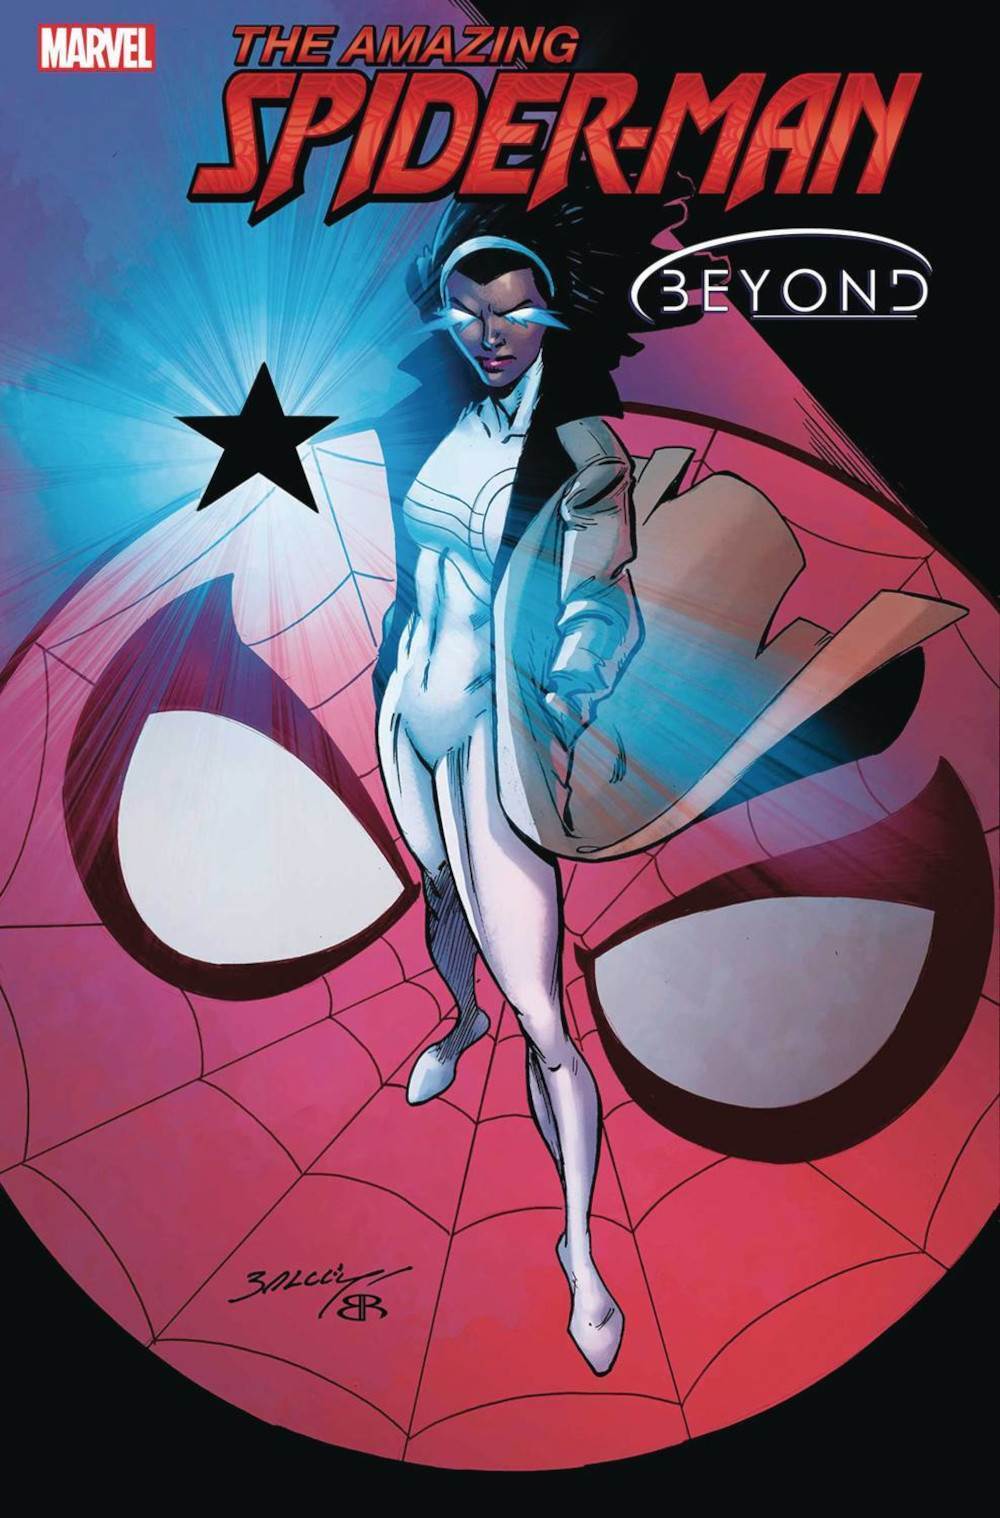 Amazing Spider-Man #92 bey.a Marvel 2022 6th Series Beyond Variant Comic Book